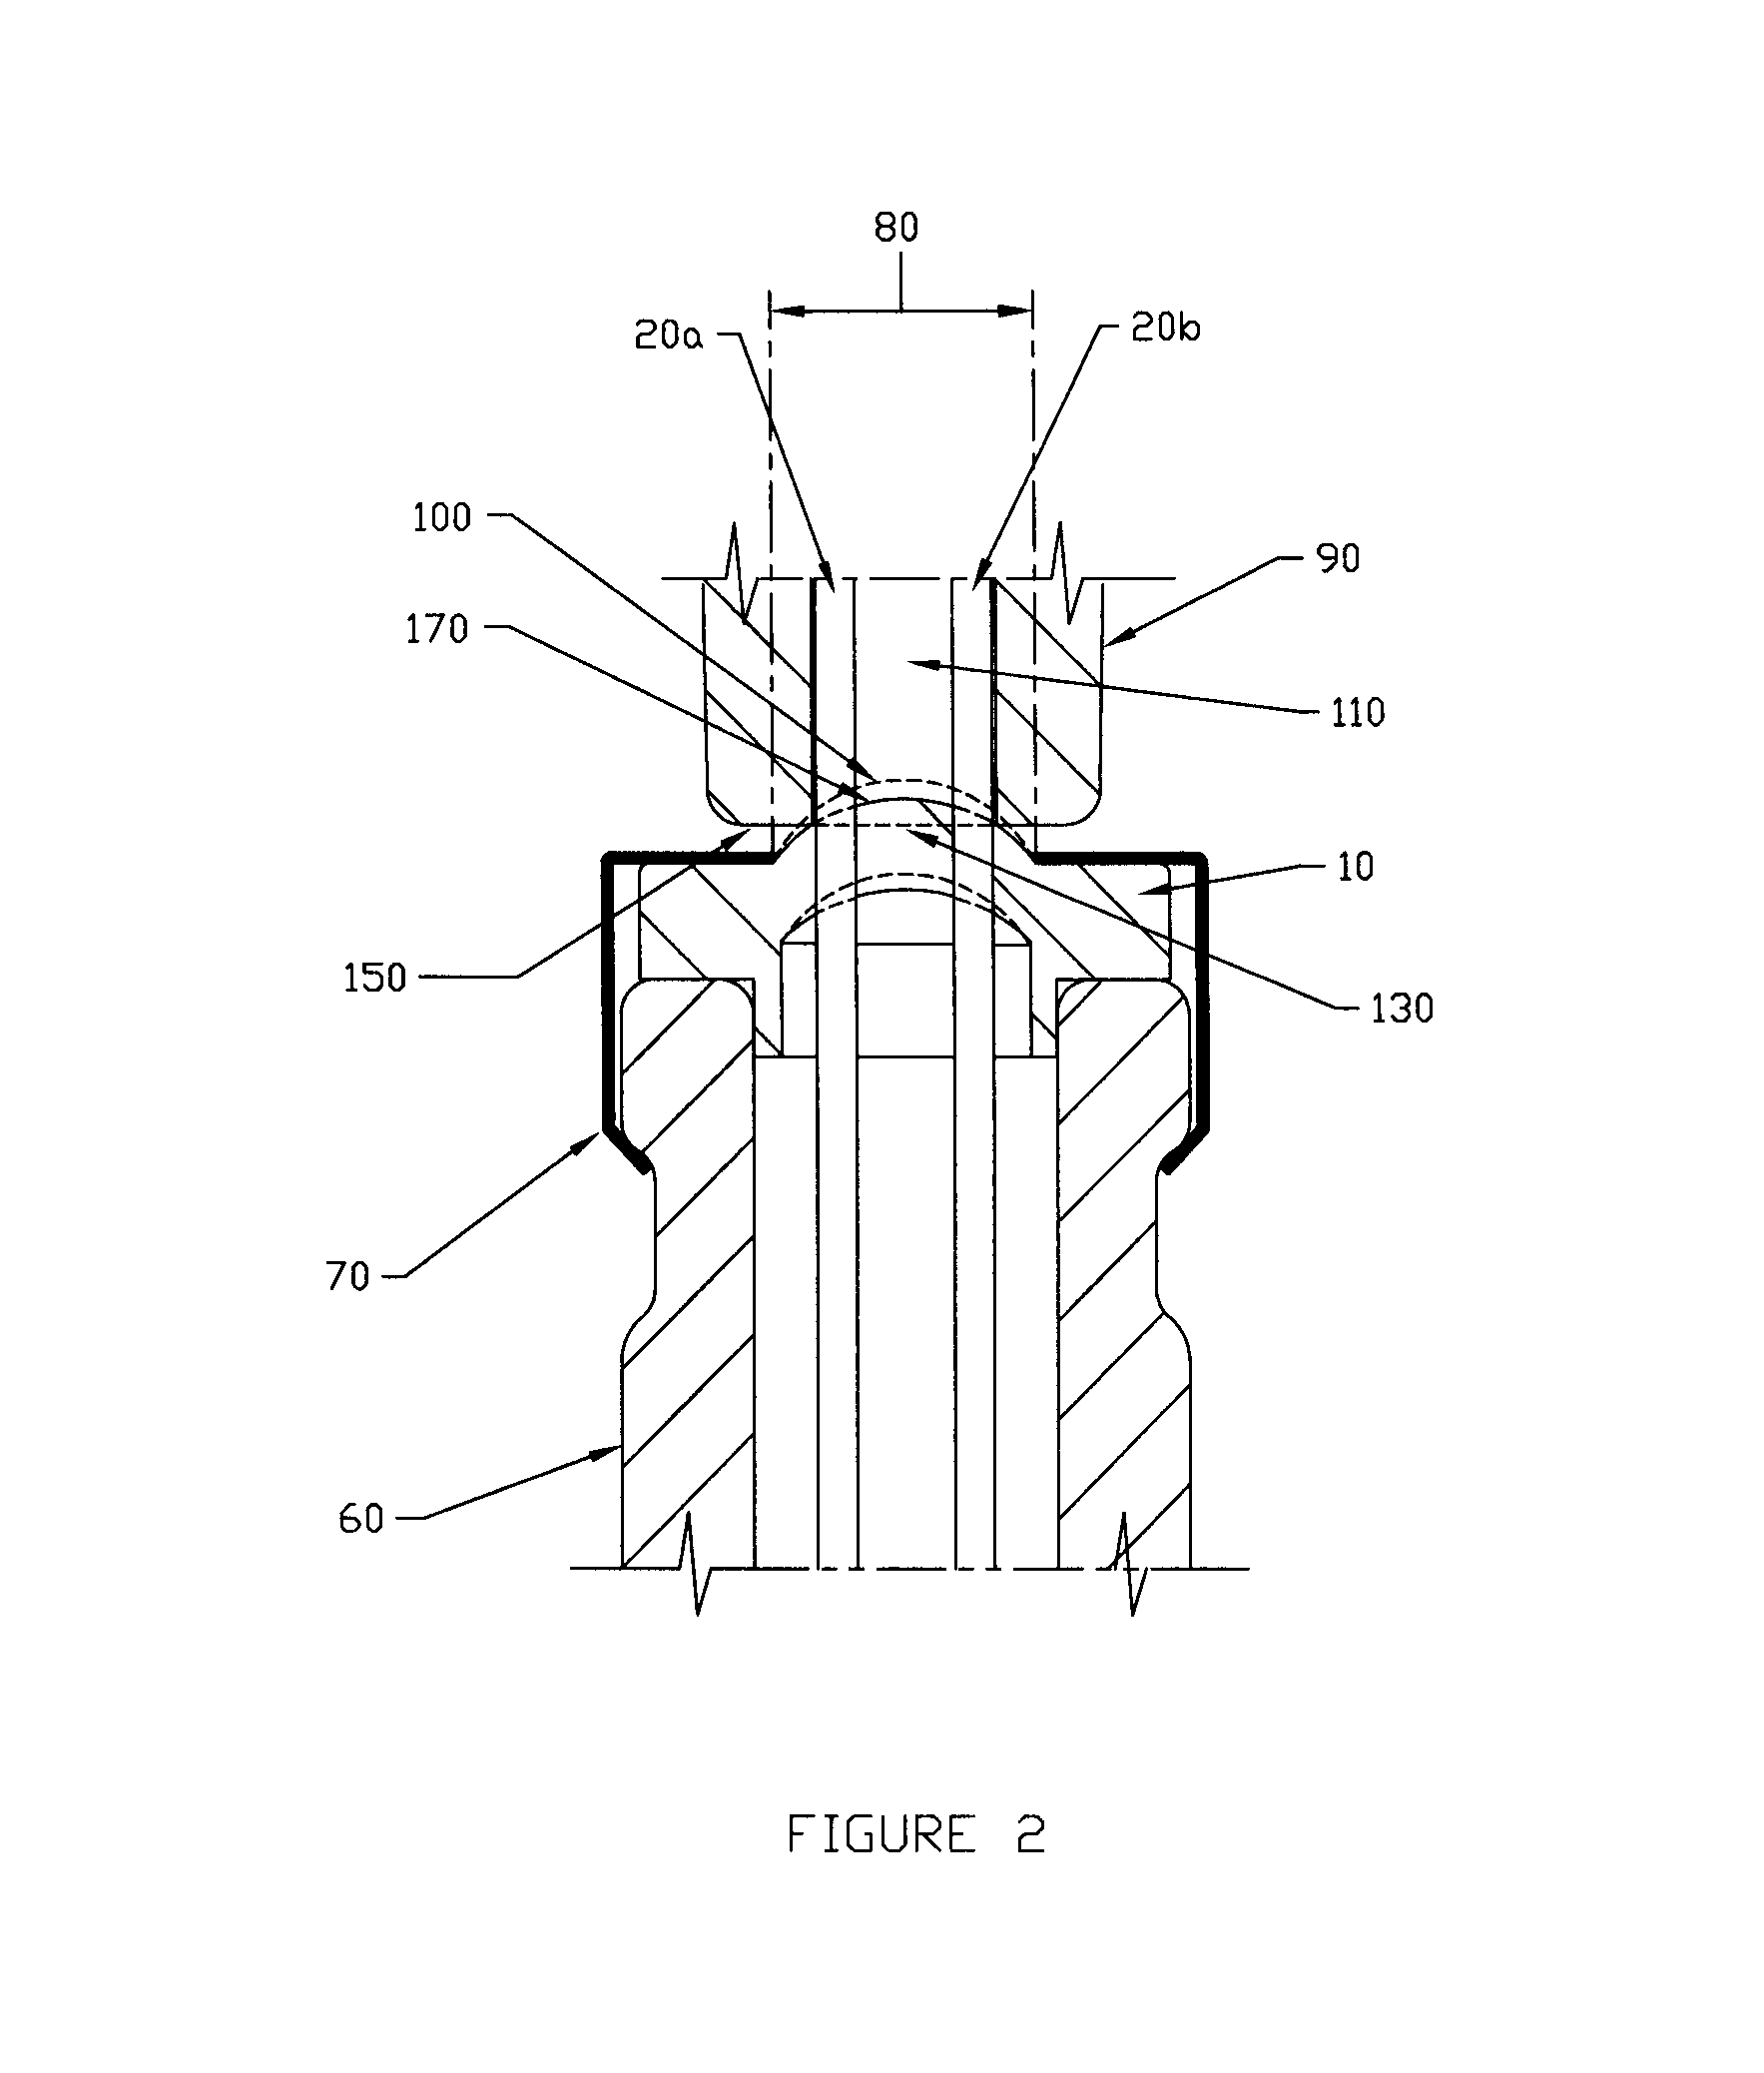 Method for increasing the leakage resistance in a closed, pressurized system comprising a septum-sealed container